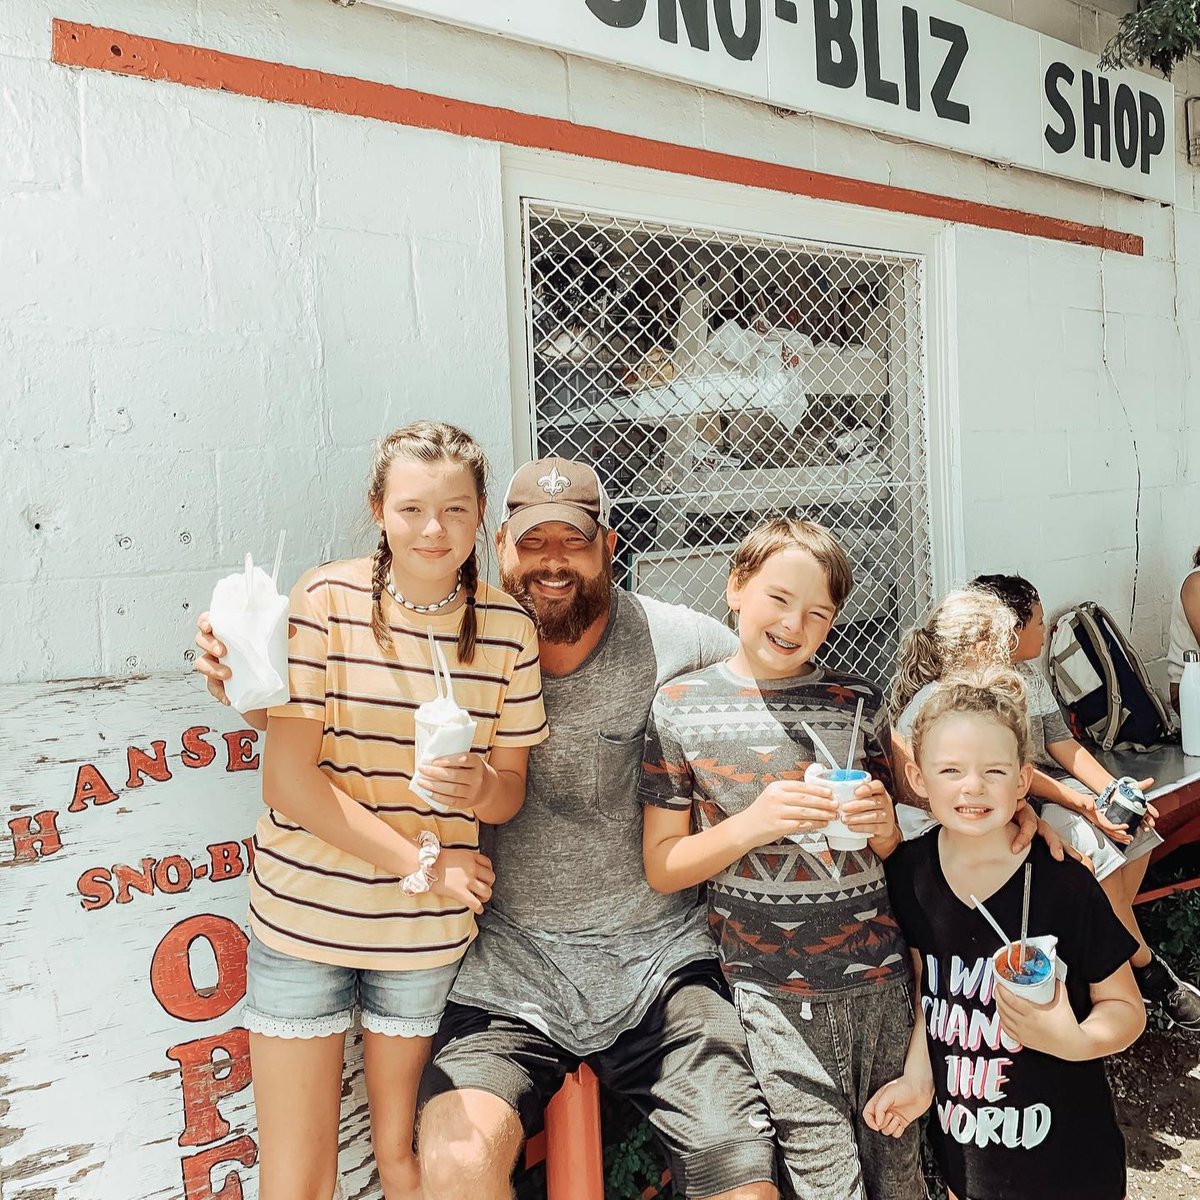 New Orleans: fun for the whole family! 

For family-friendly itineraries and planning tools, click here: bit.ly/43l3z84

📸 from Instagram users:
@/lindsflowers
@/forteza_twins
@/poeticnubia
@/pevan